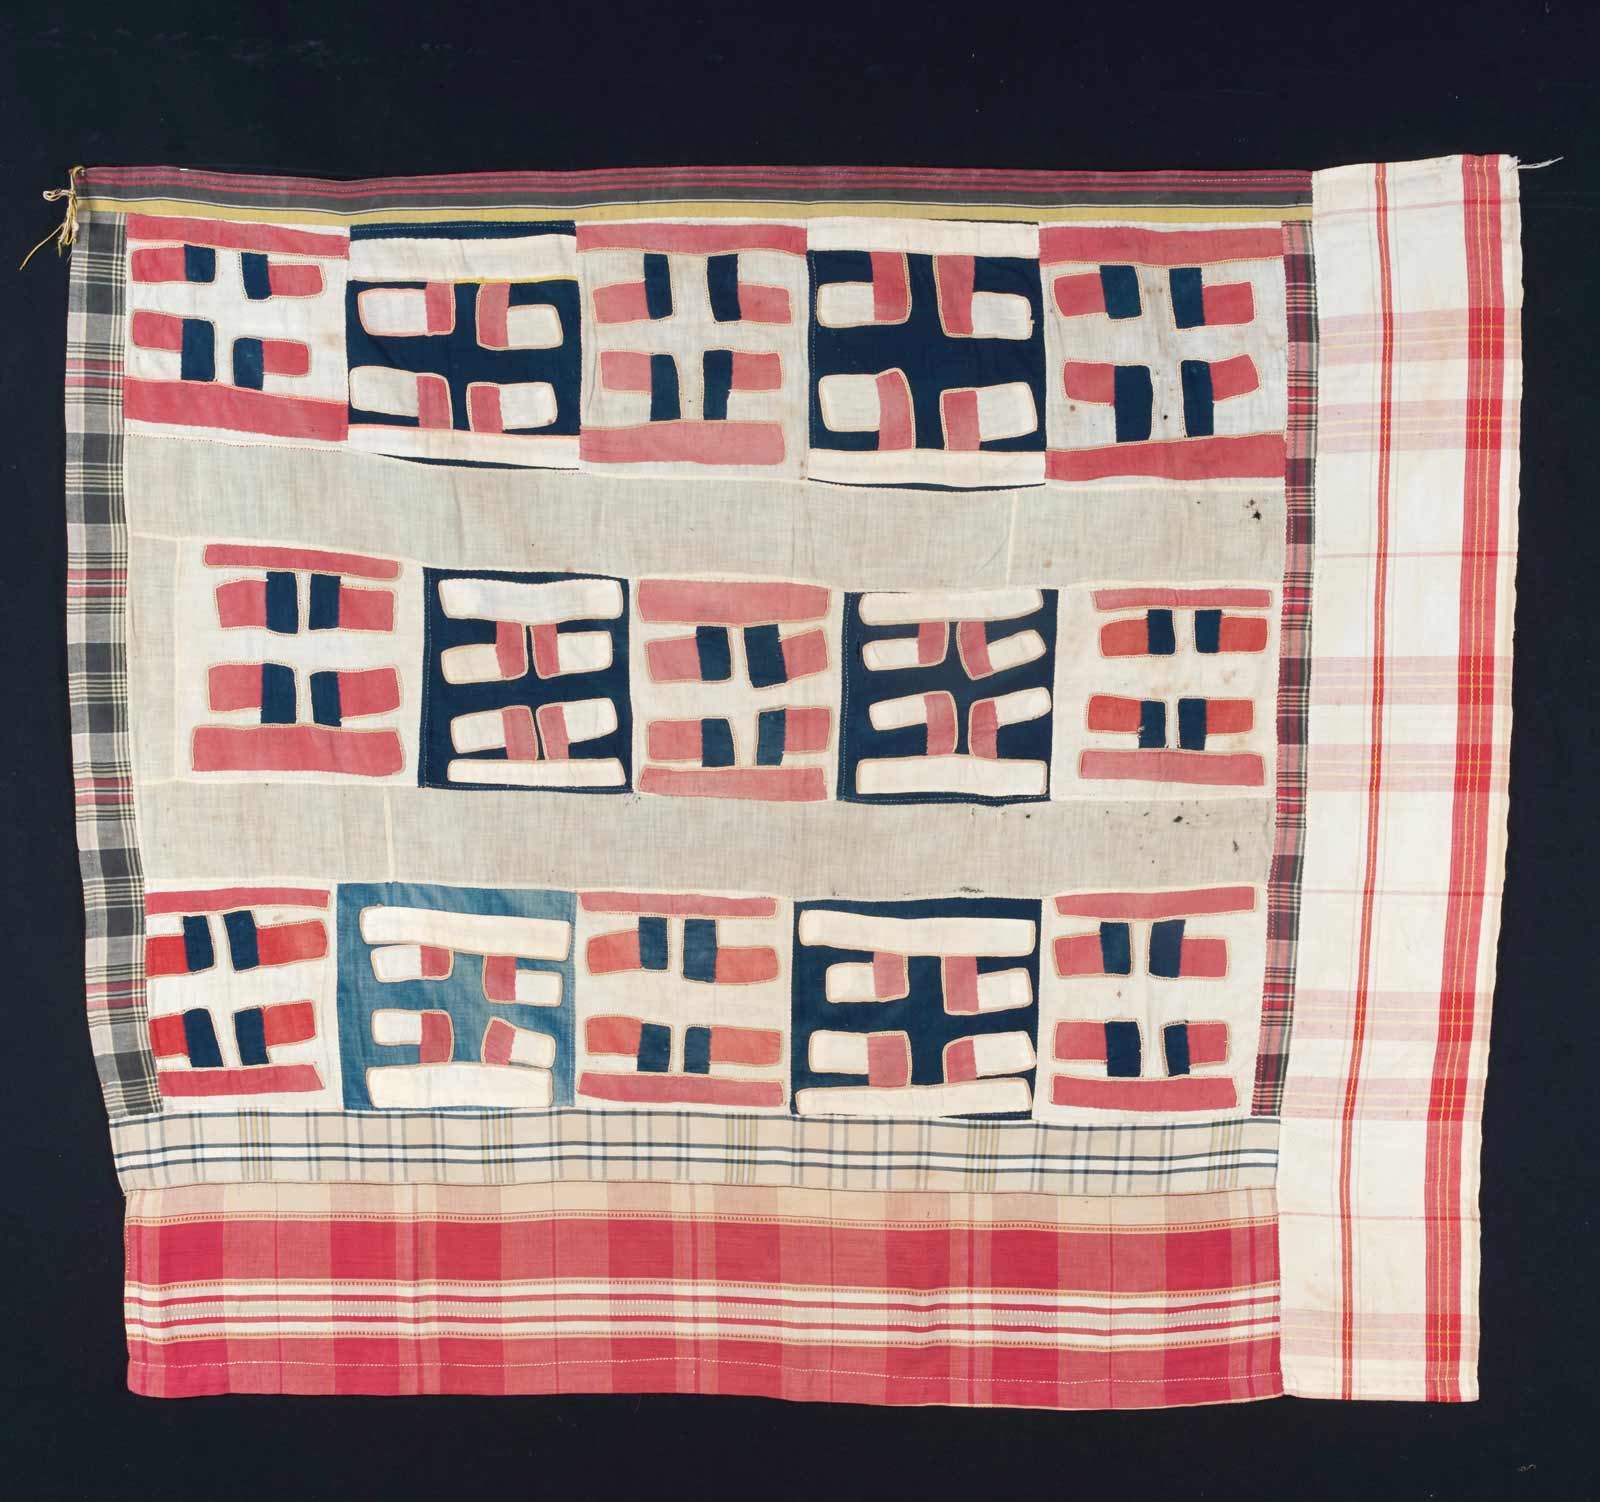 Fig. 9 Unrecorded artist, Cotton shoulder cloth for men with patchwork motif, 1890-1919. Cotton, patchwork, 112.5 x 97.5 cm, Dutch National Museum of World Cultures, Inv. Nr. TM-3290-237. In Maroon culture, fabrics are transformed, using the patchwork technique, into textile art with a character and meaning all its own.